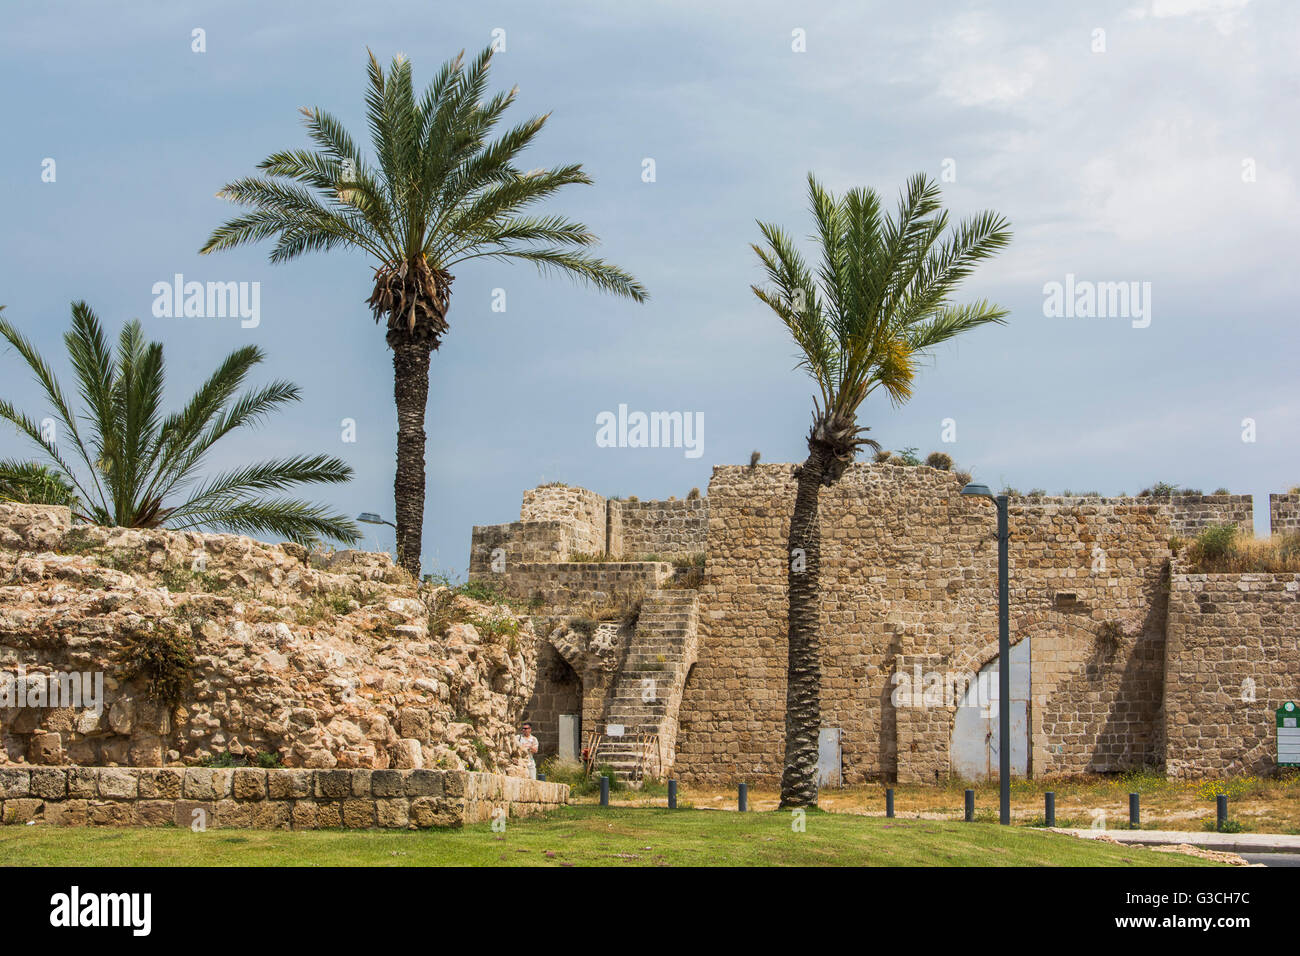 Israel, Akko, old town, port town, old town wall, city wall, town gate, palms, Stock Photo